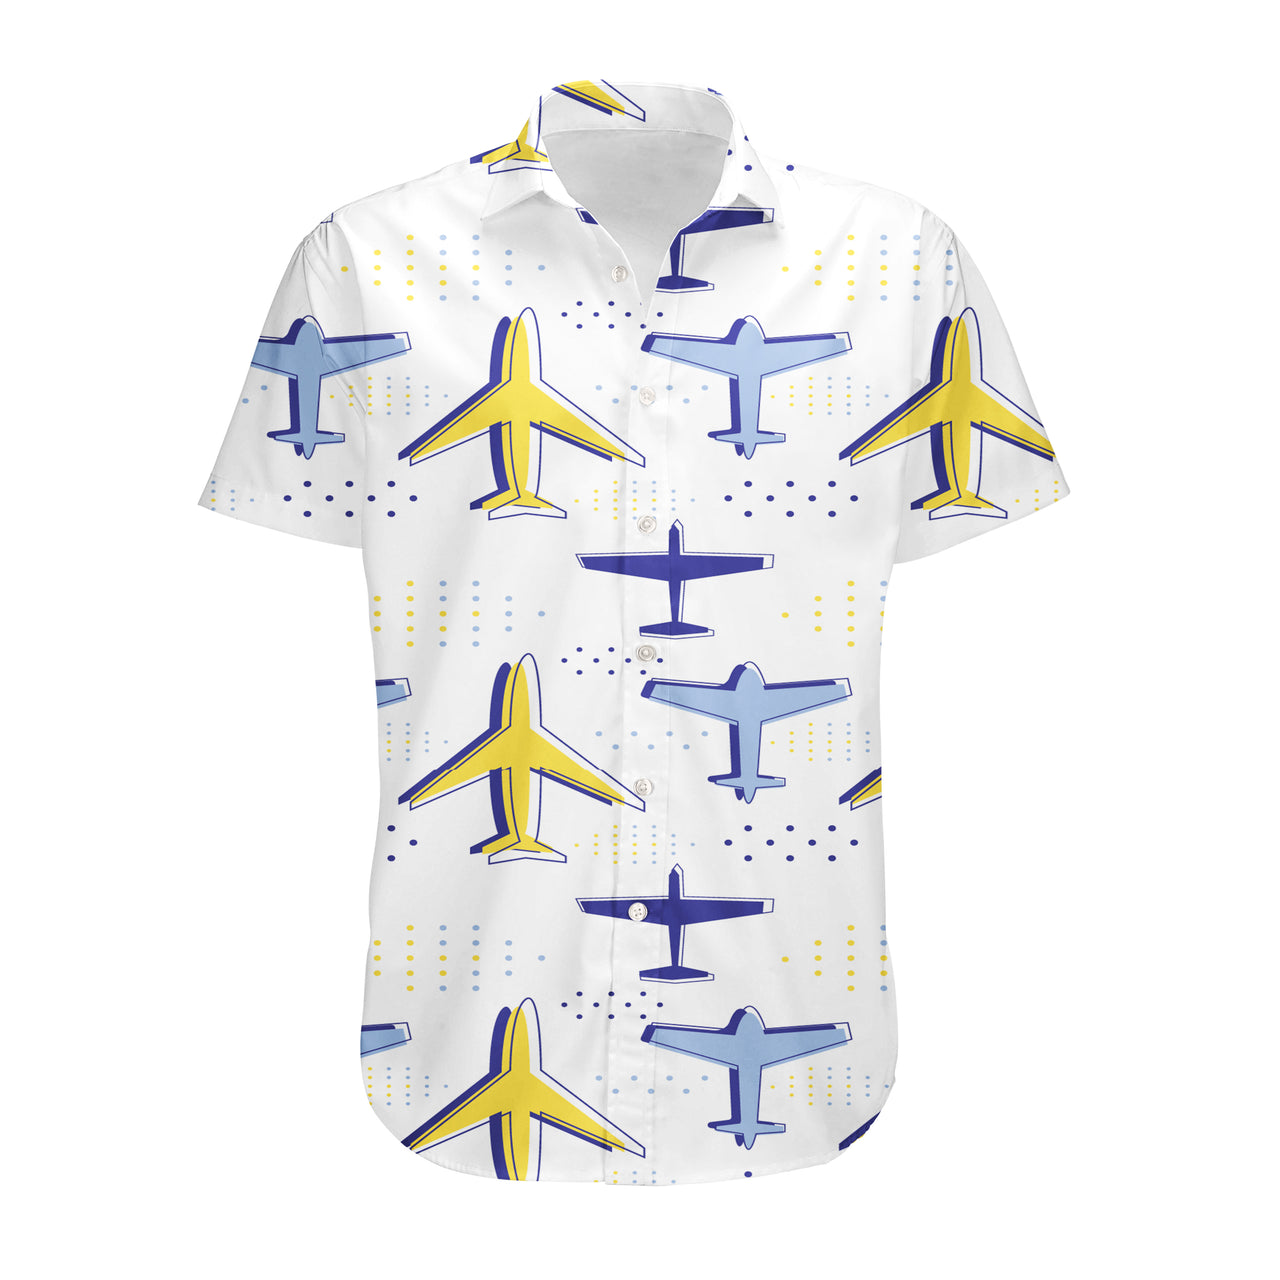 Very Colourful Airplanes Designed 3D Shirts